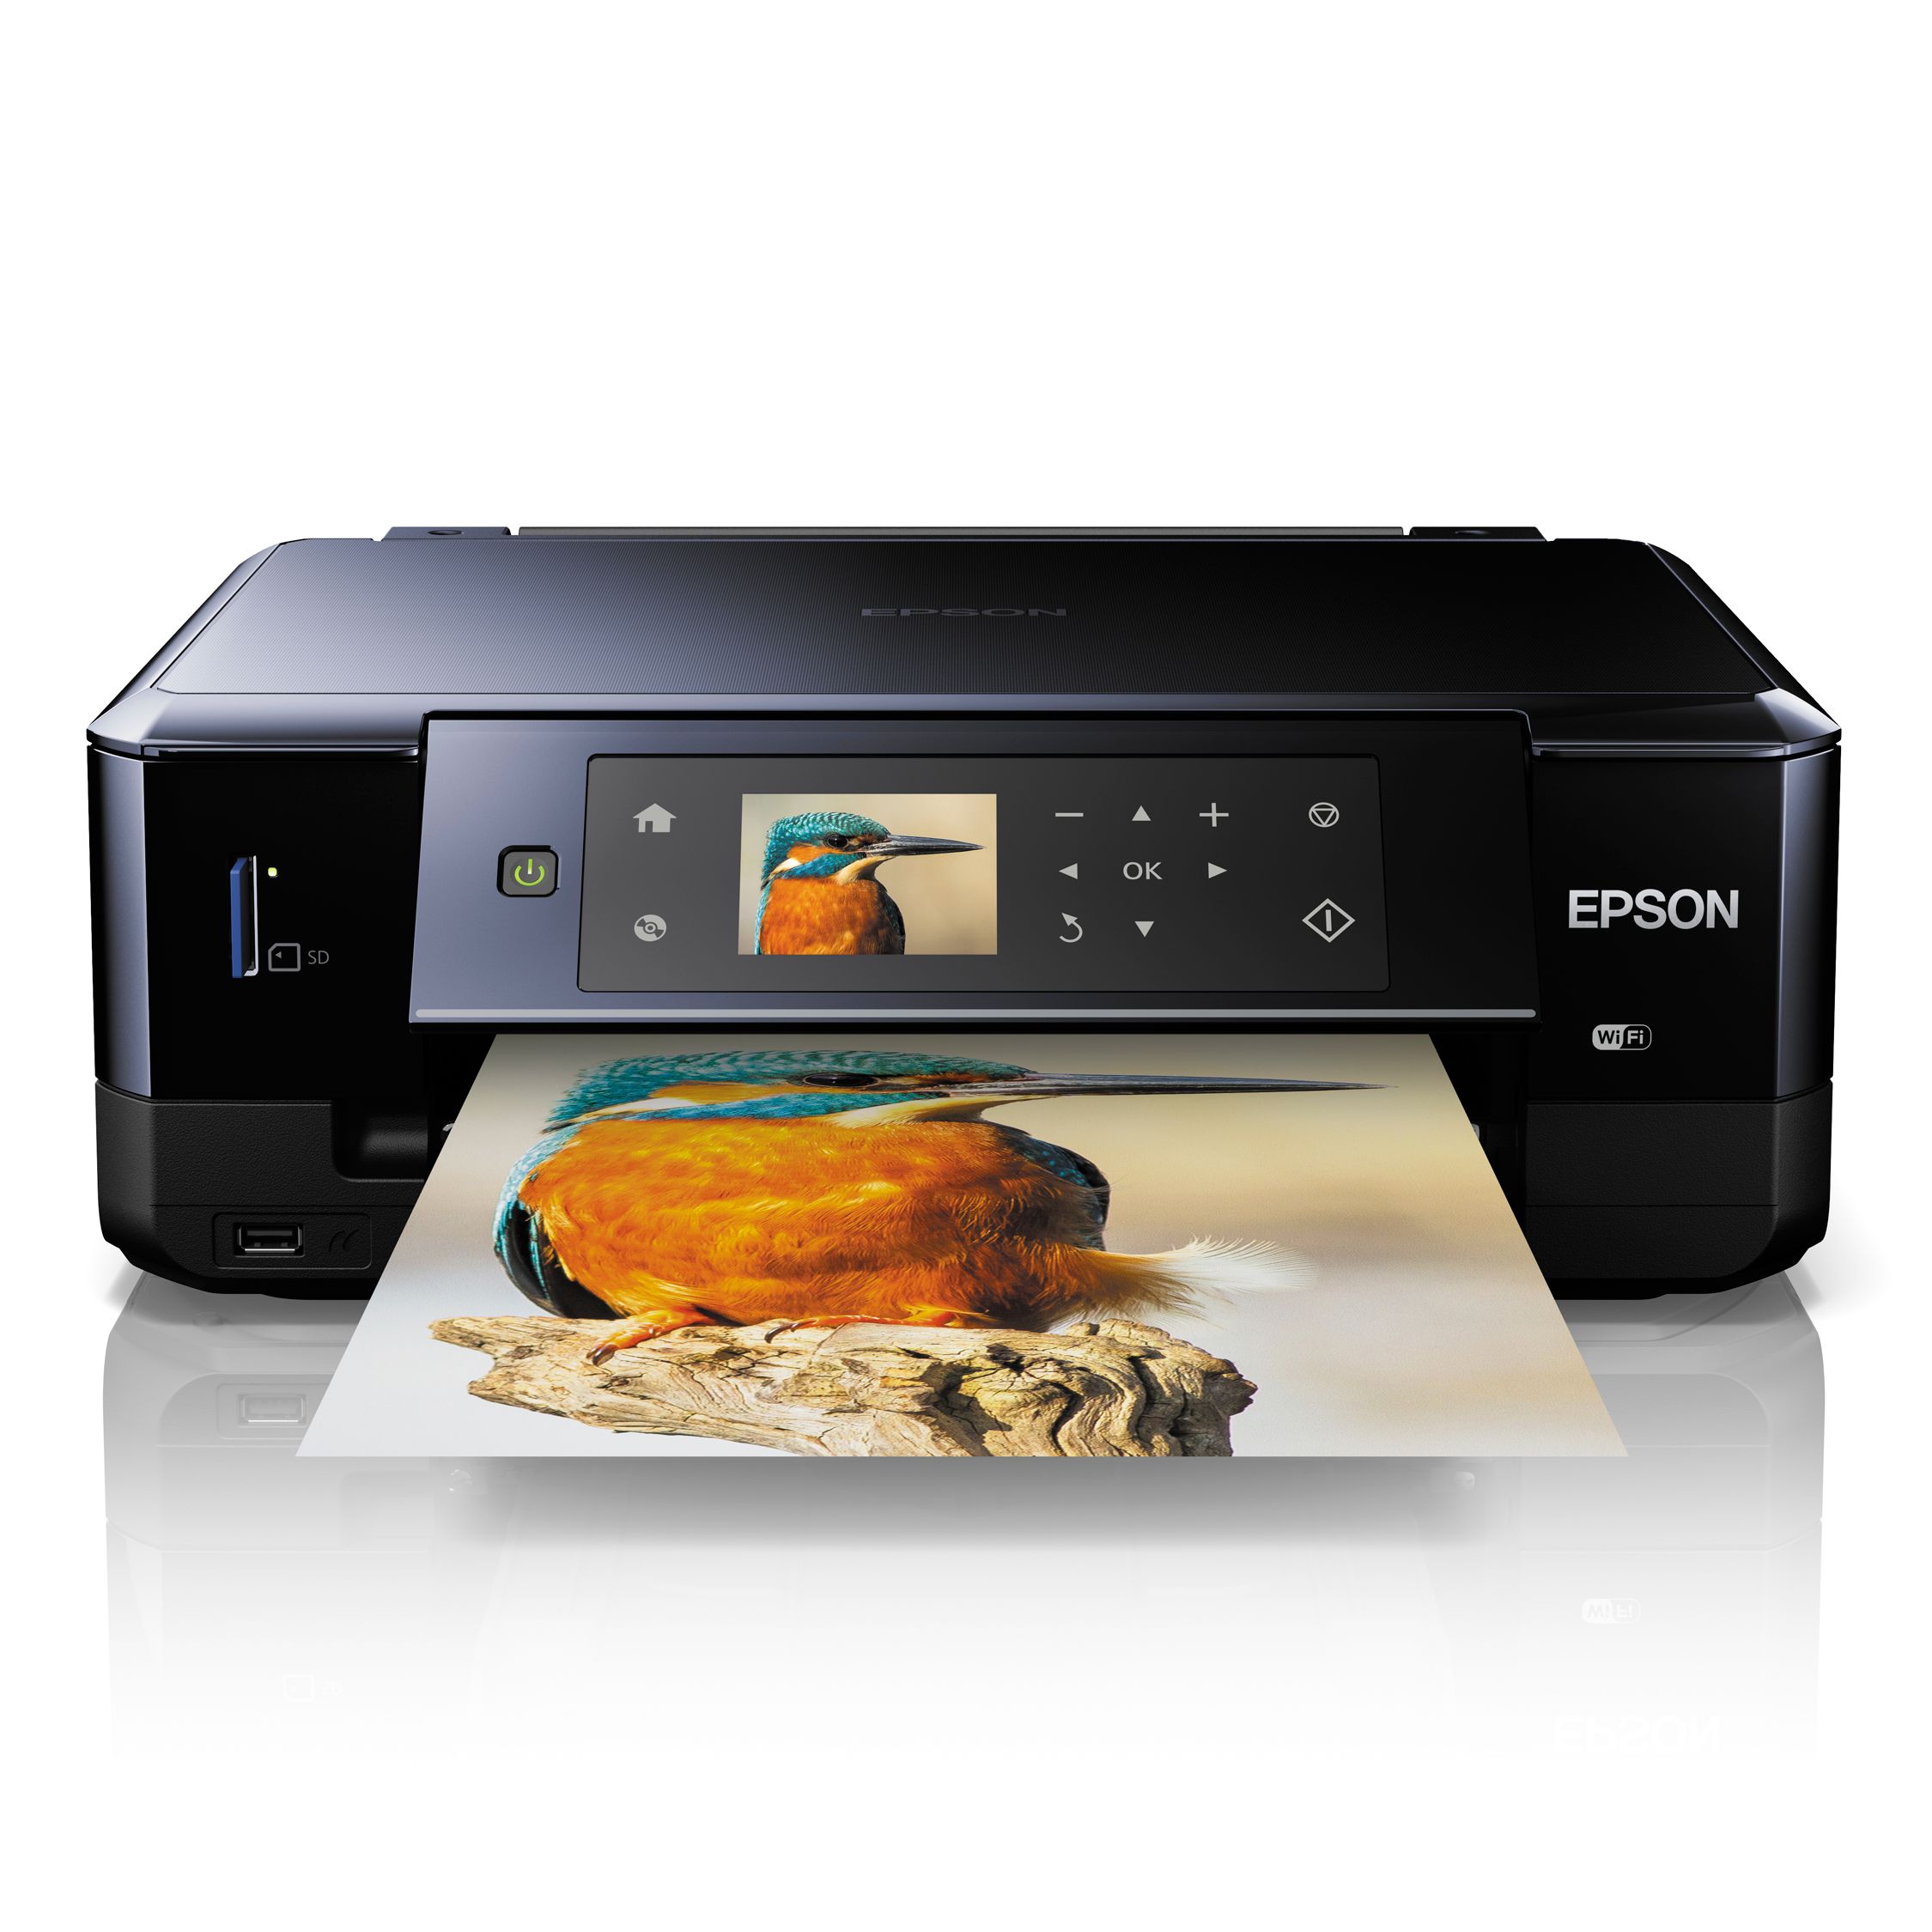  Epson  Expression Premium XP 620  All in One Wireless 